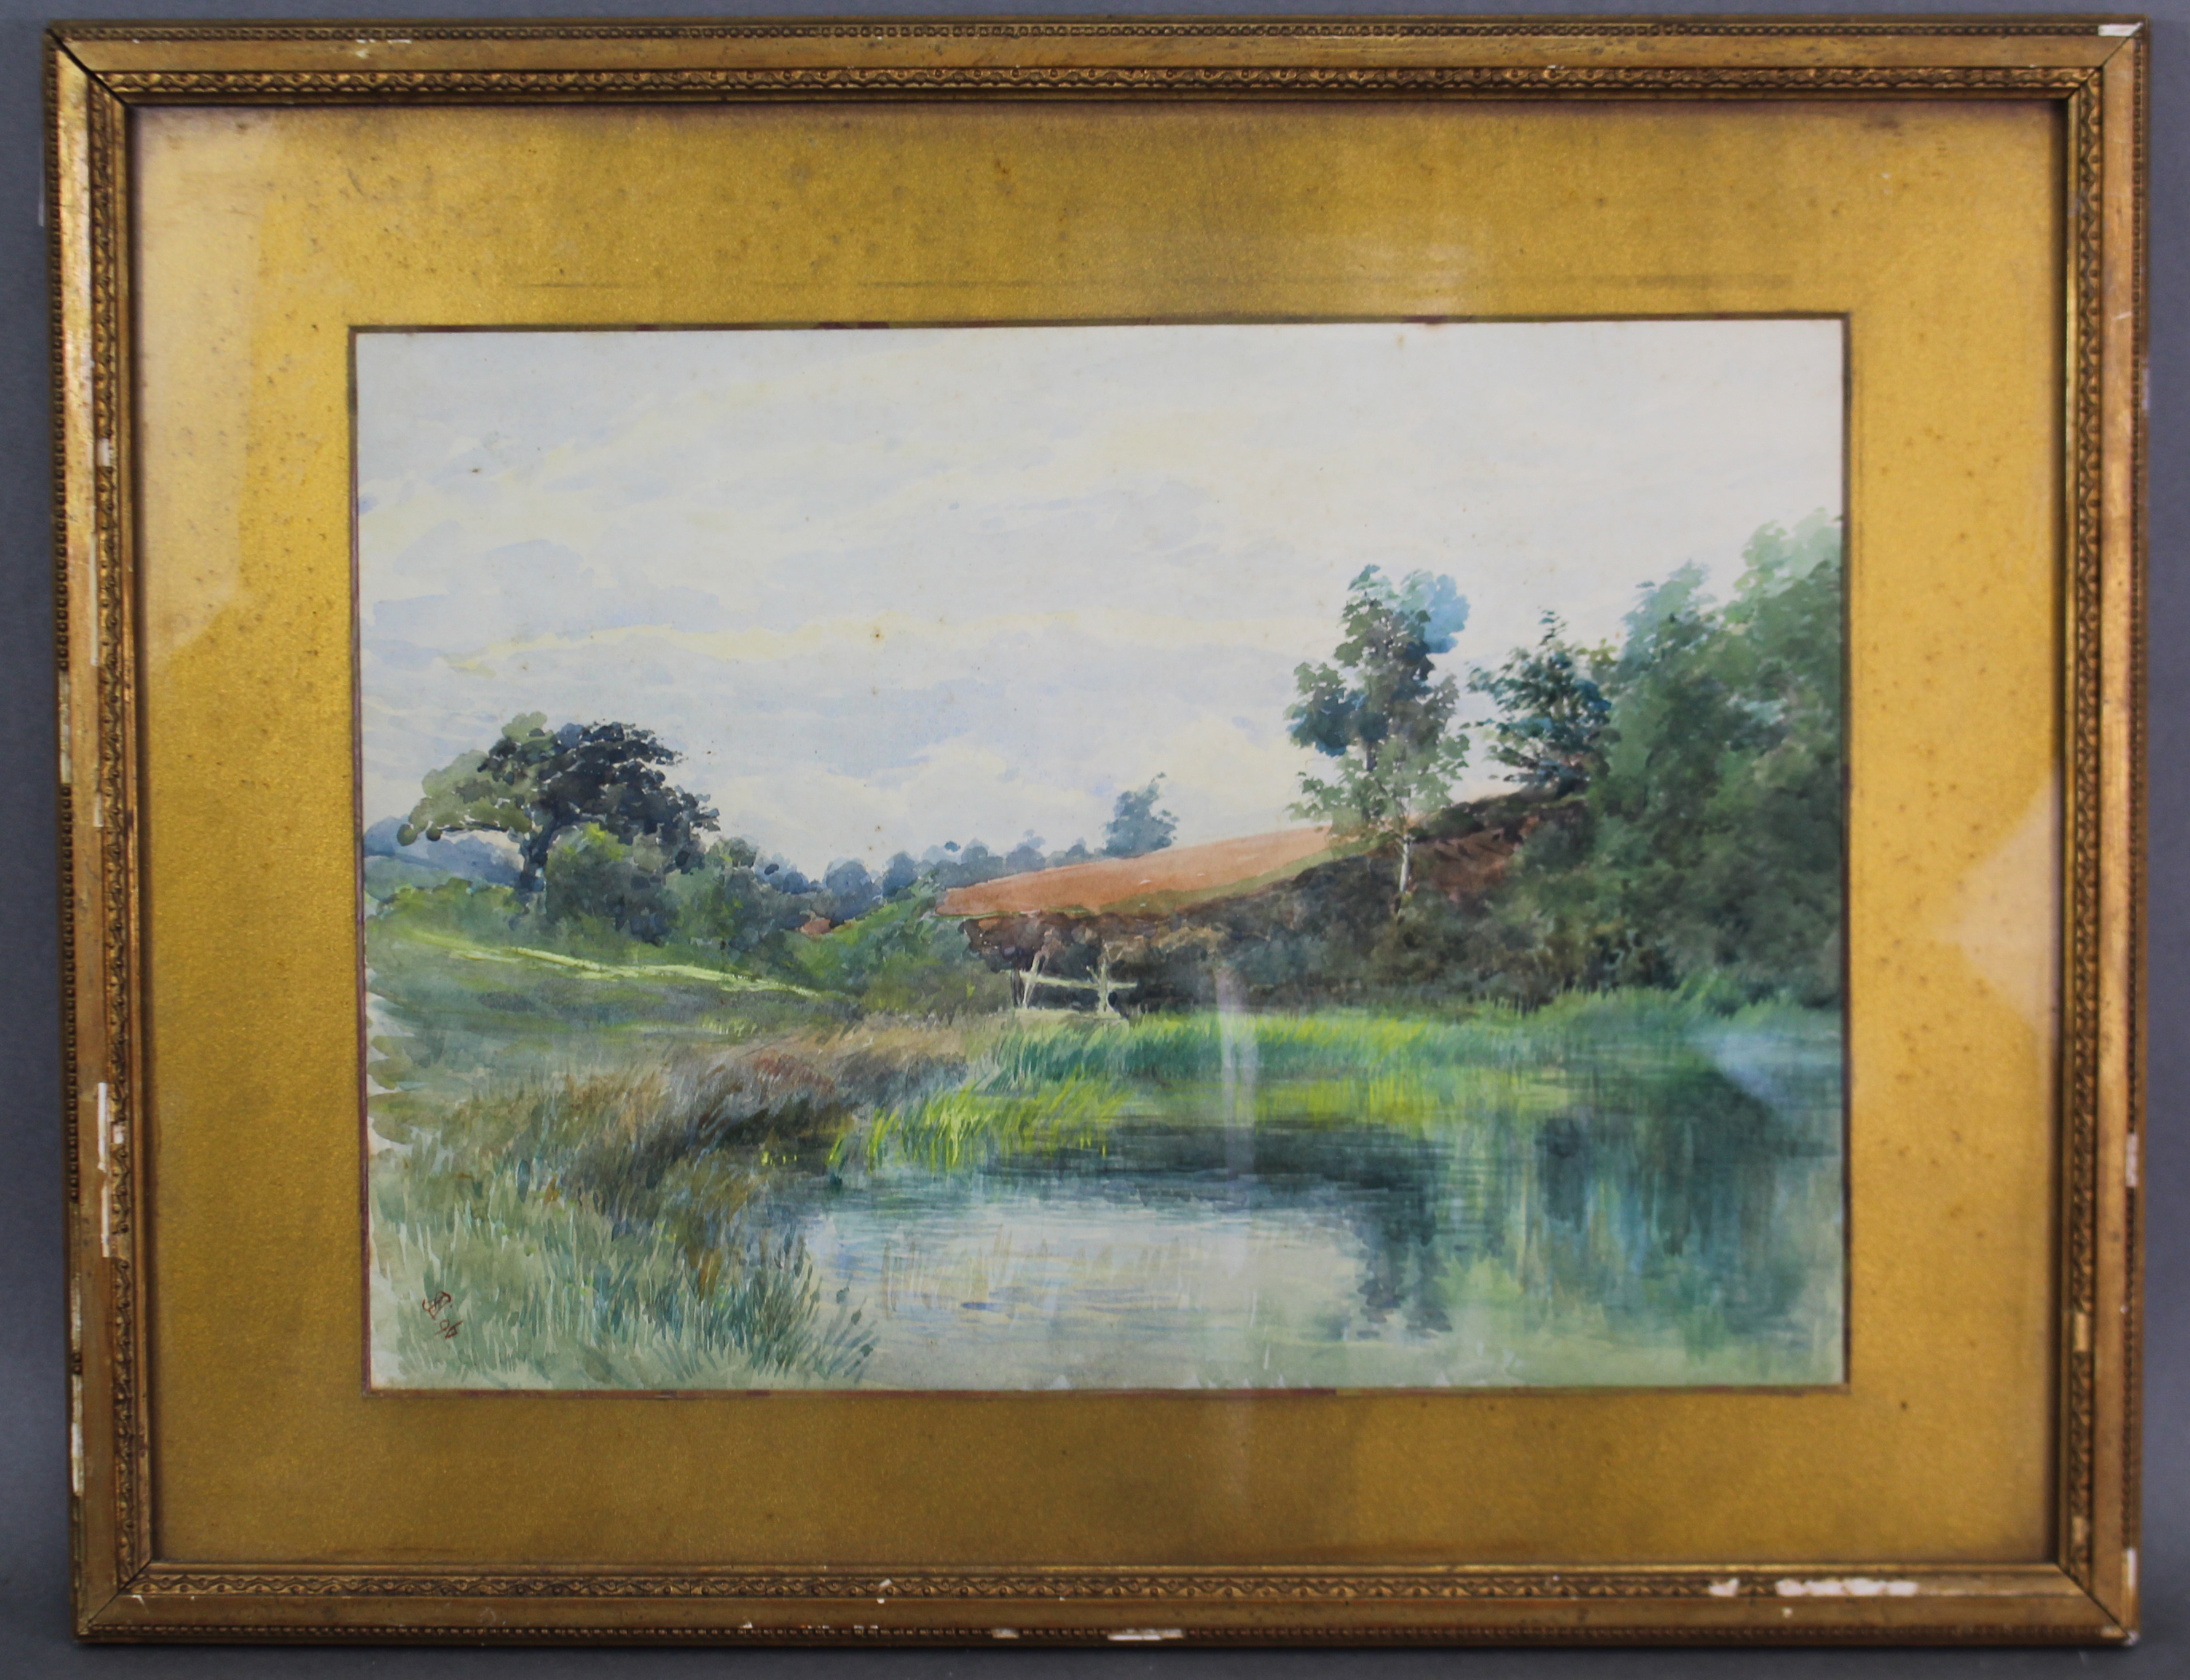 ENGLISH SCHOOL, 19th century. A rural landscape with willow arches, signed & dated “M.J.S. ‘99” - Image 3 of 4